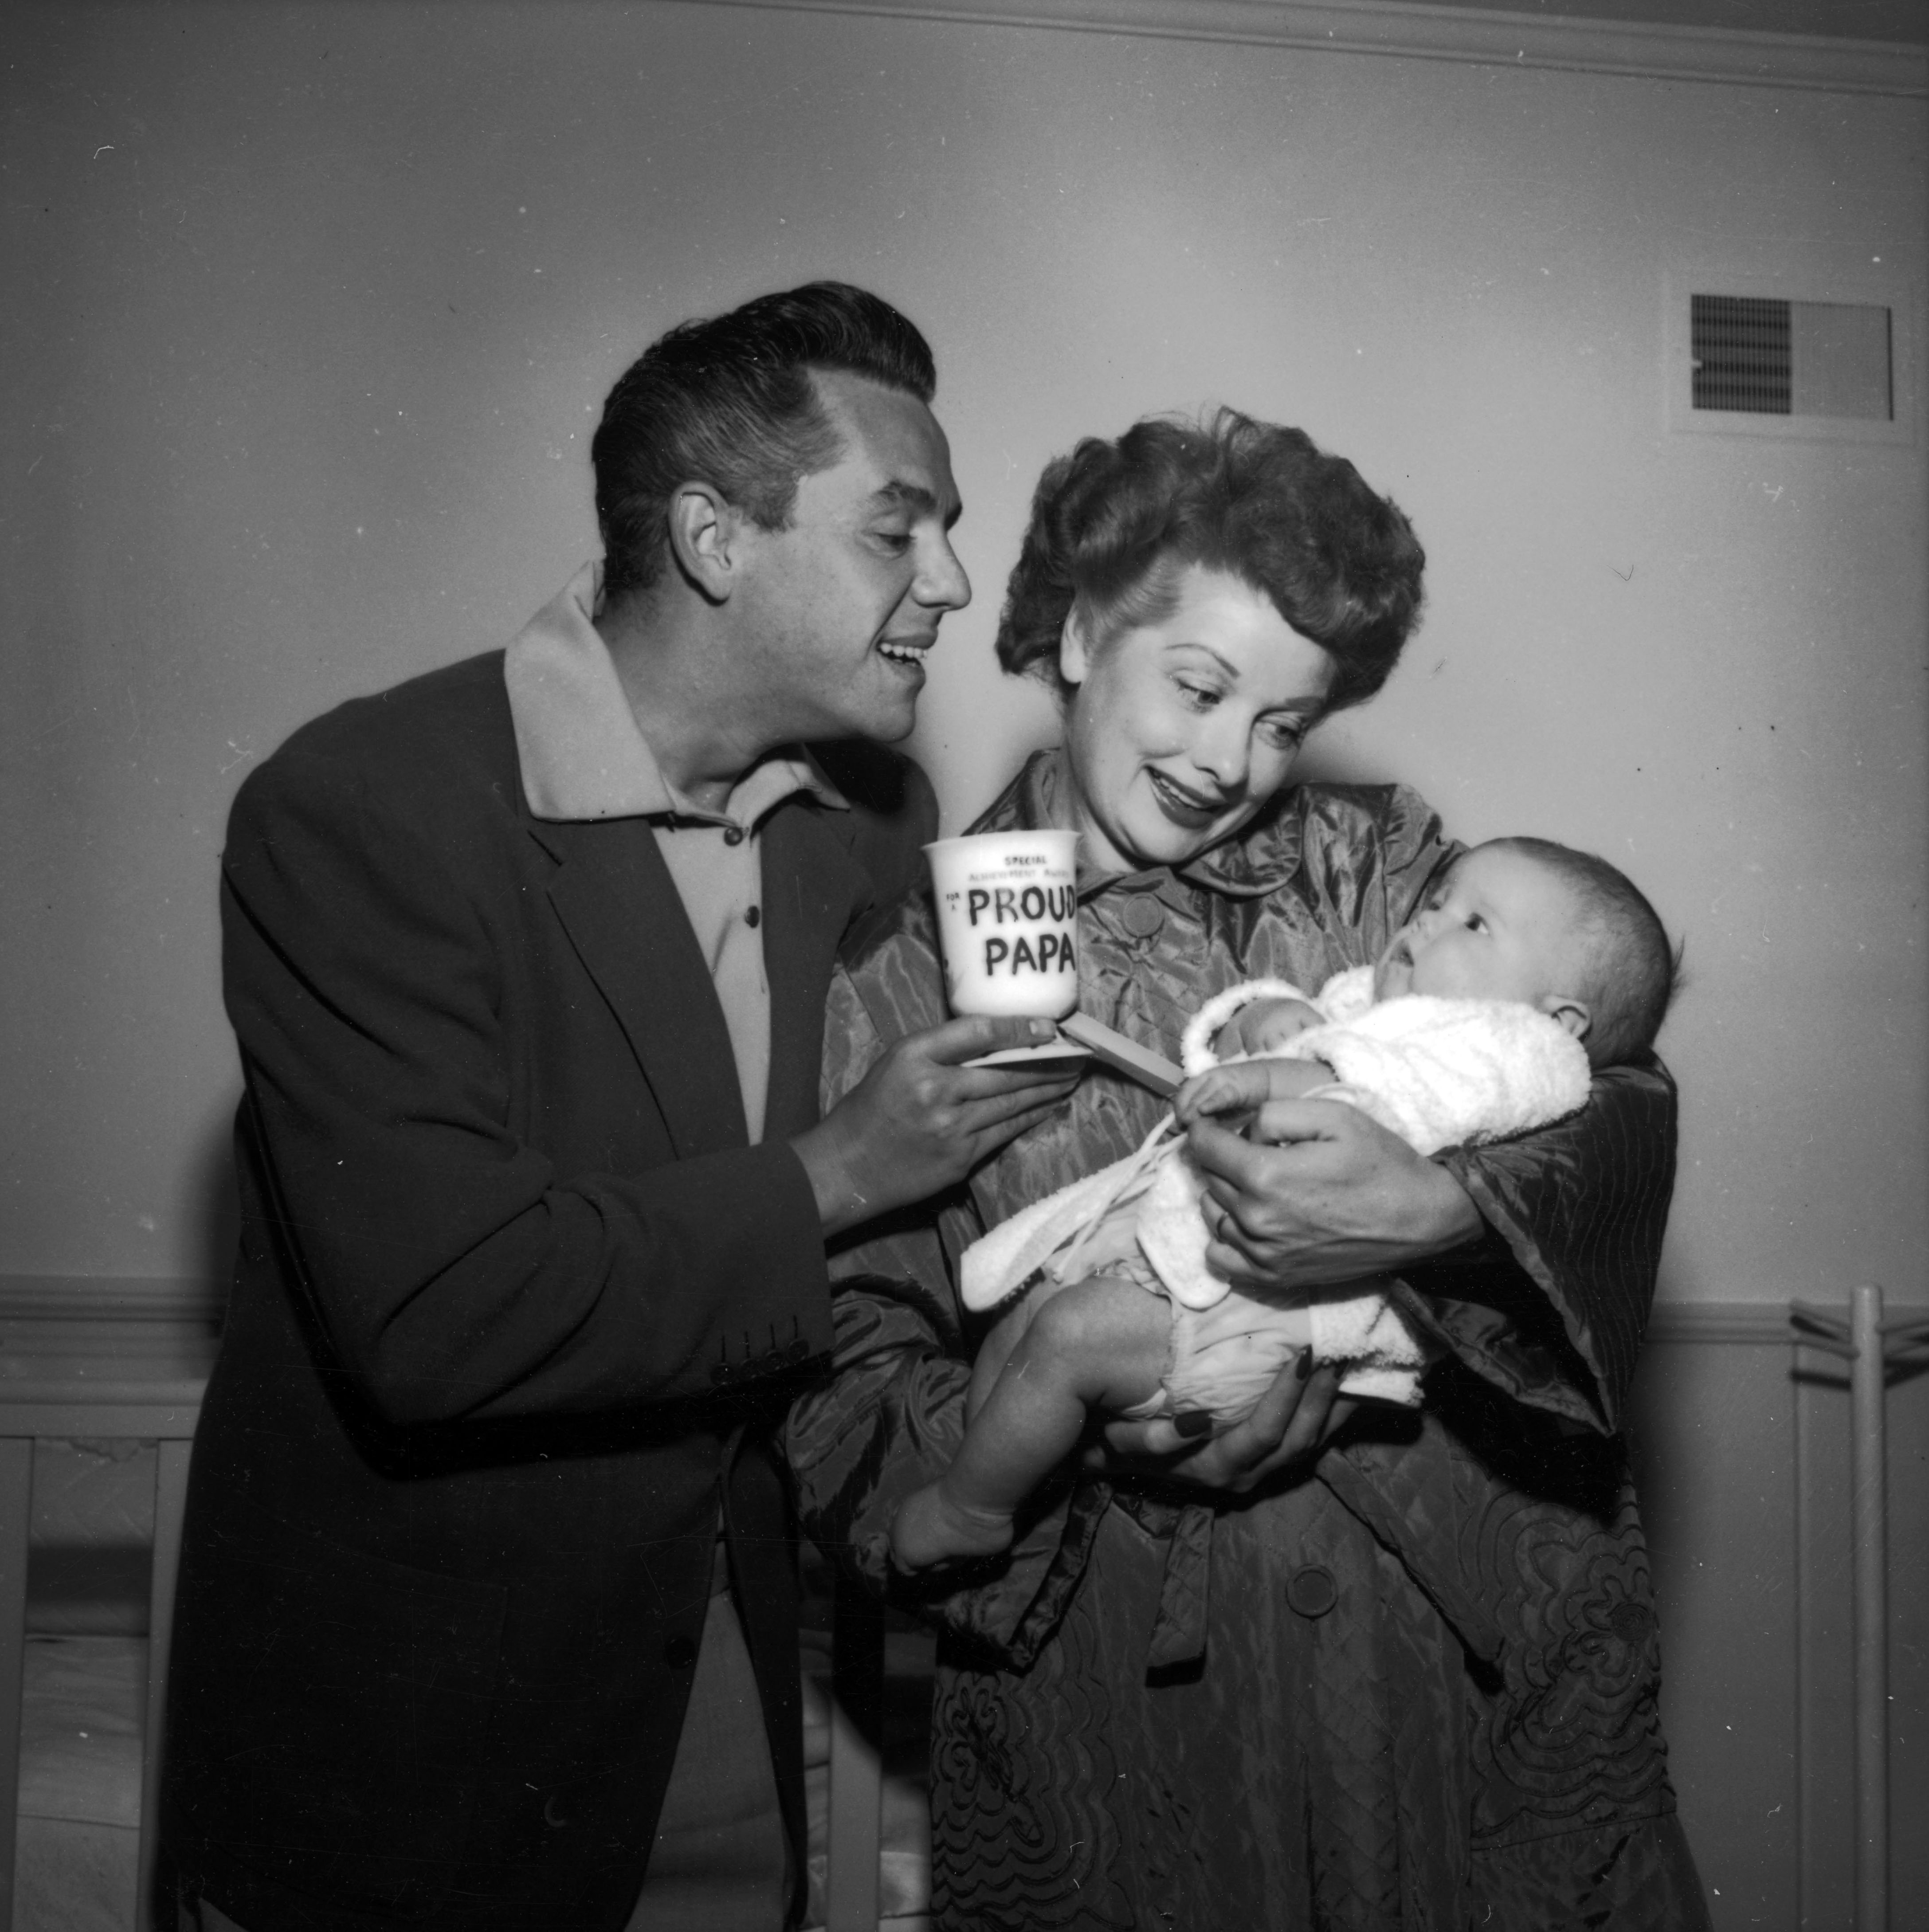 Lucille Ball at home with her husband Desi Arnaz and their son Desi Jr., 1953. Desi Sr. is holding a mug with the caption 'Proud Papa' on it